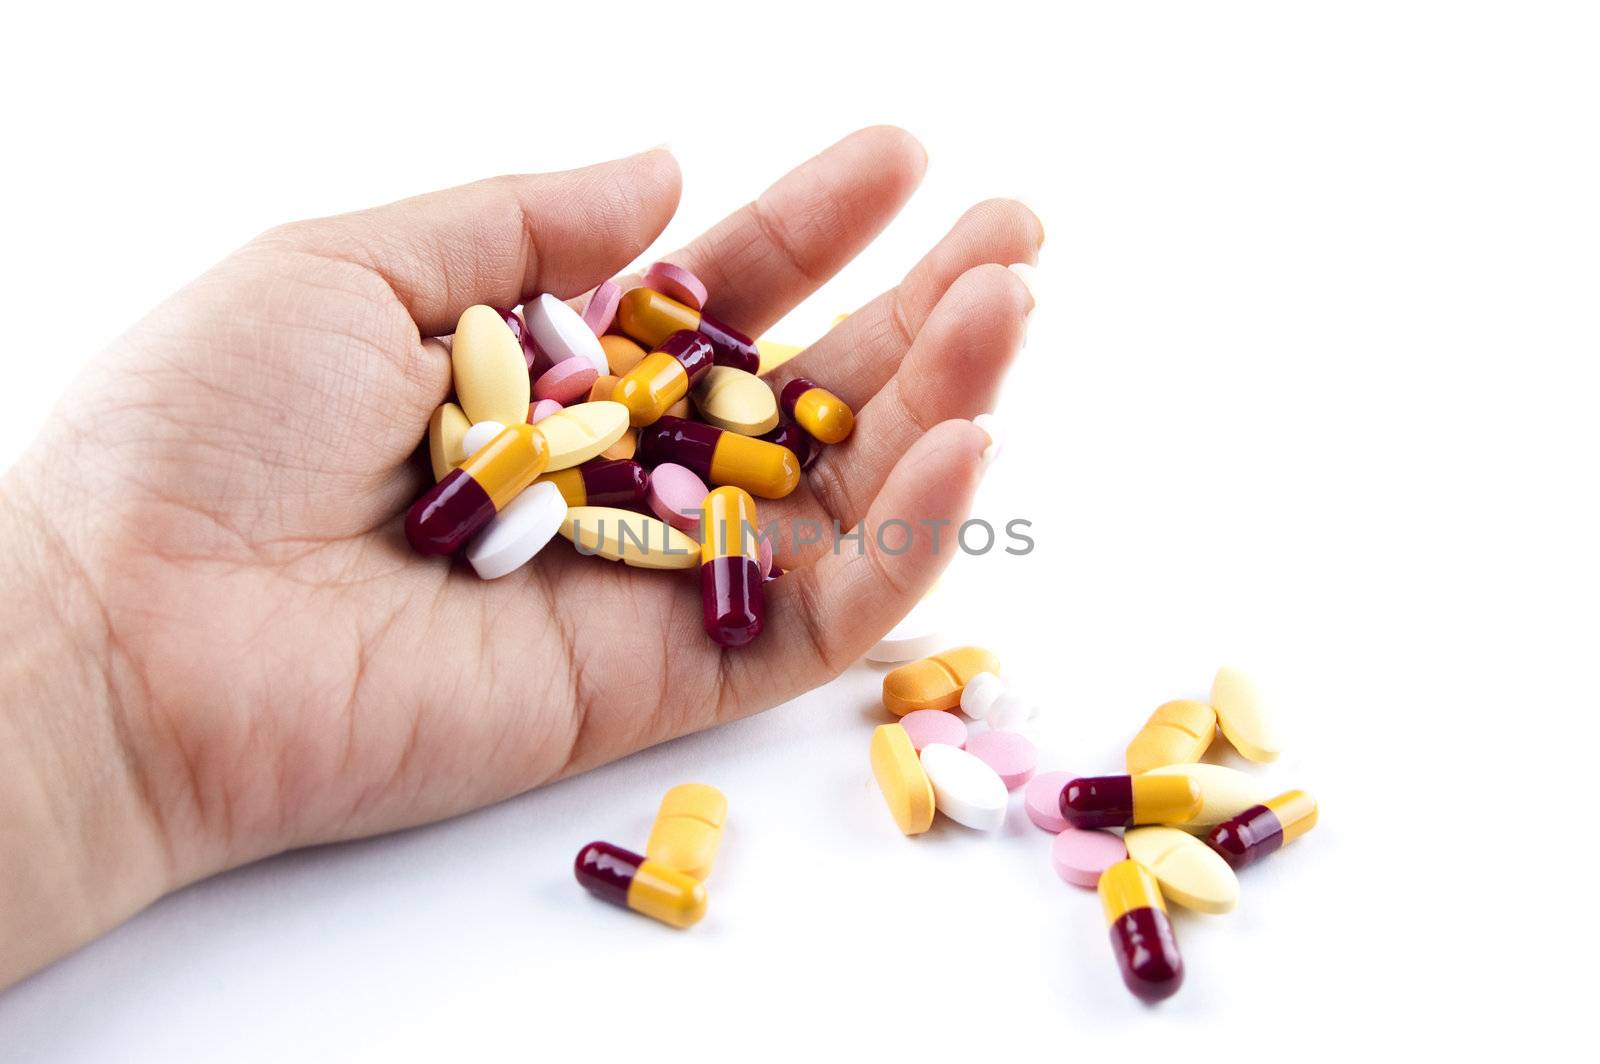 Hand with medicines isolated on white background